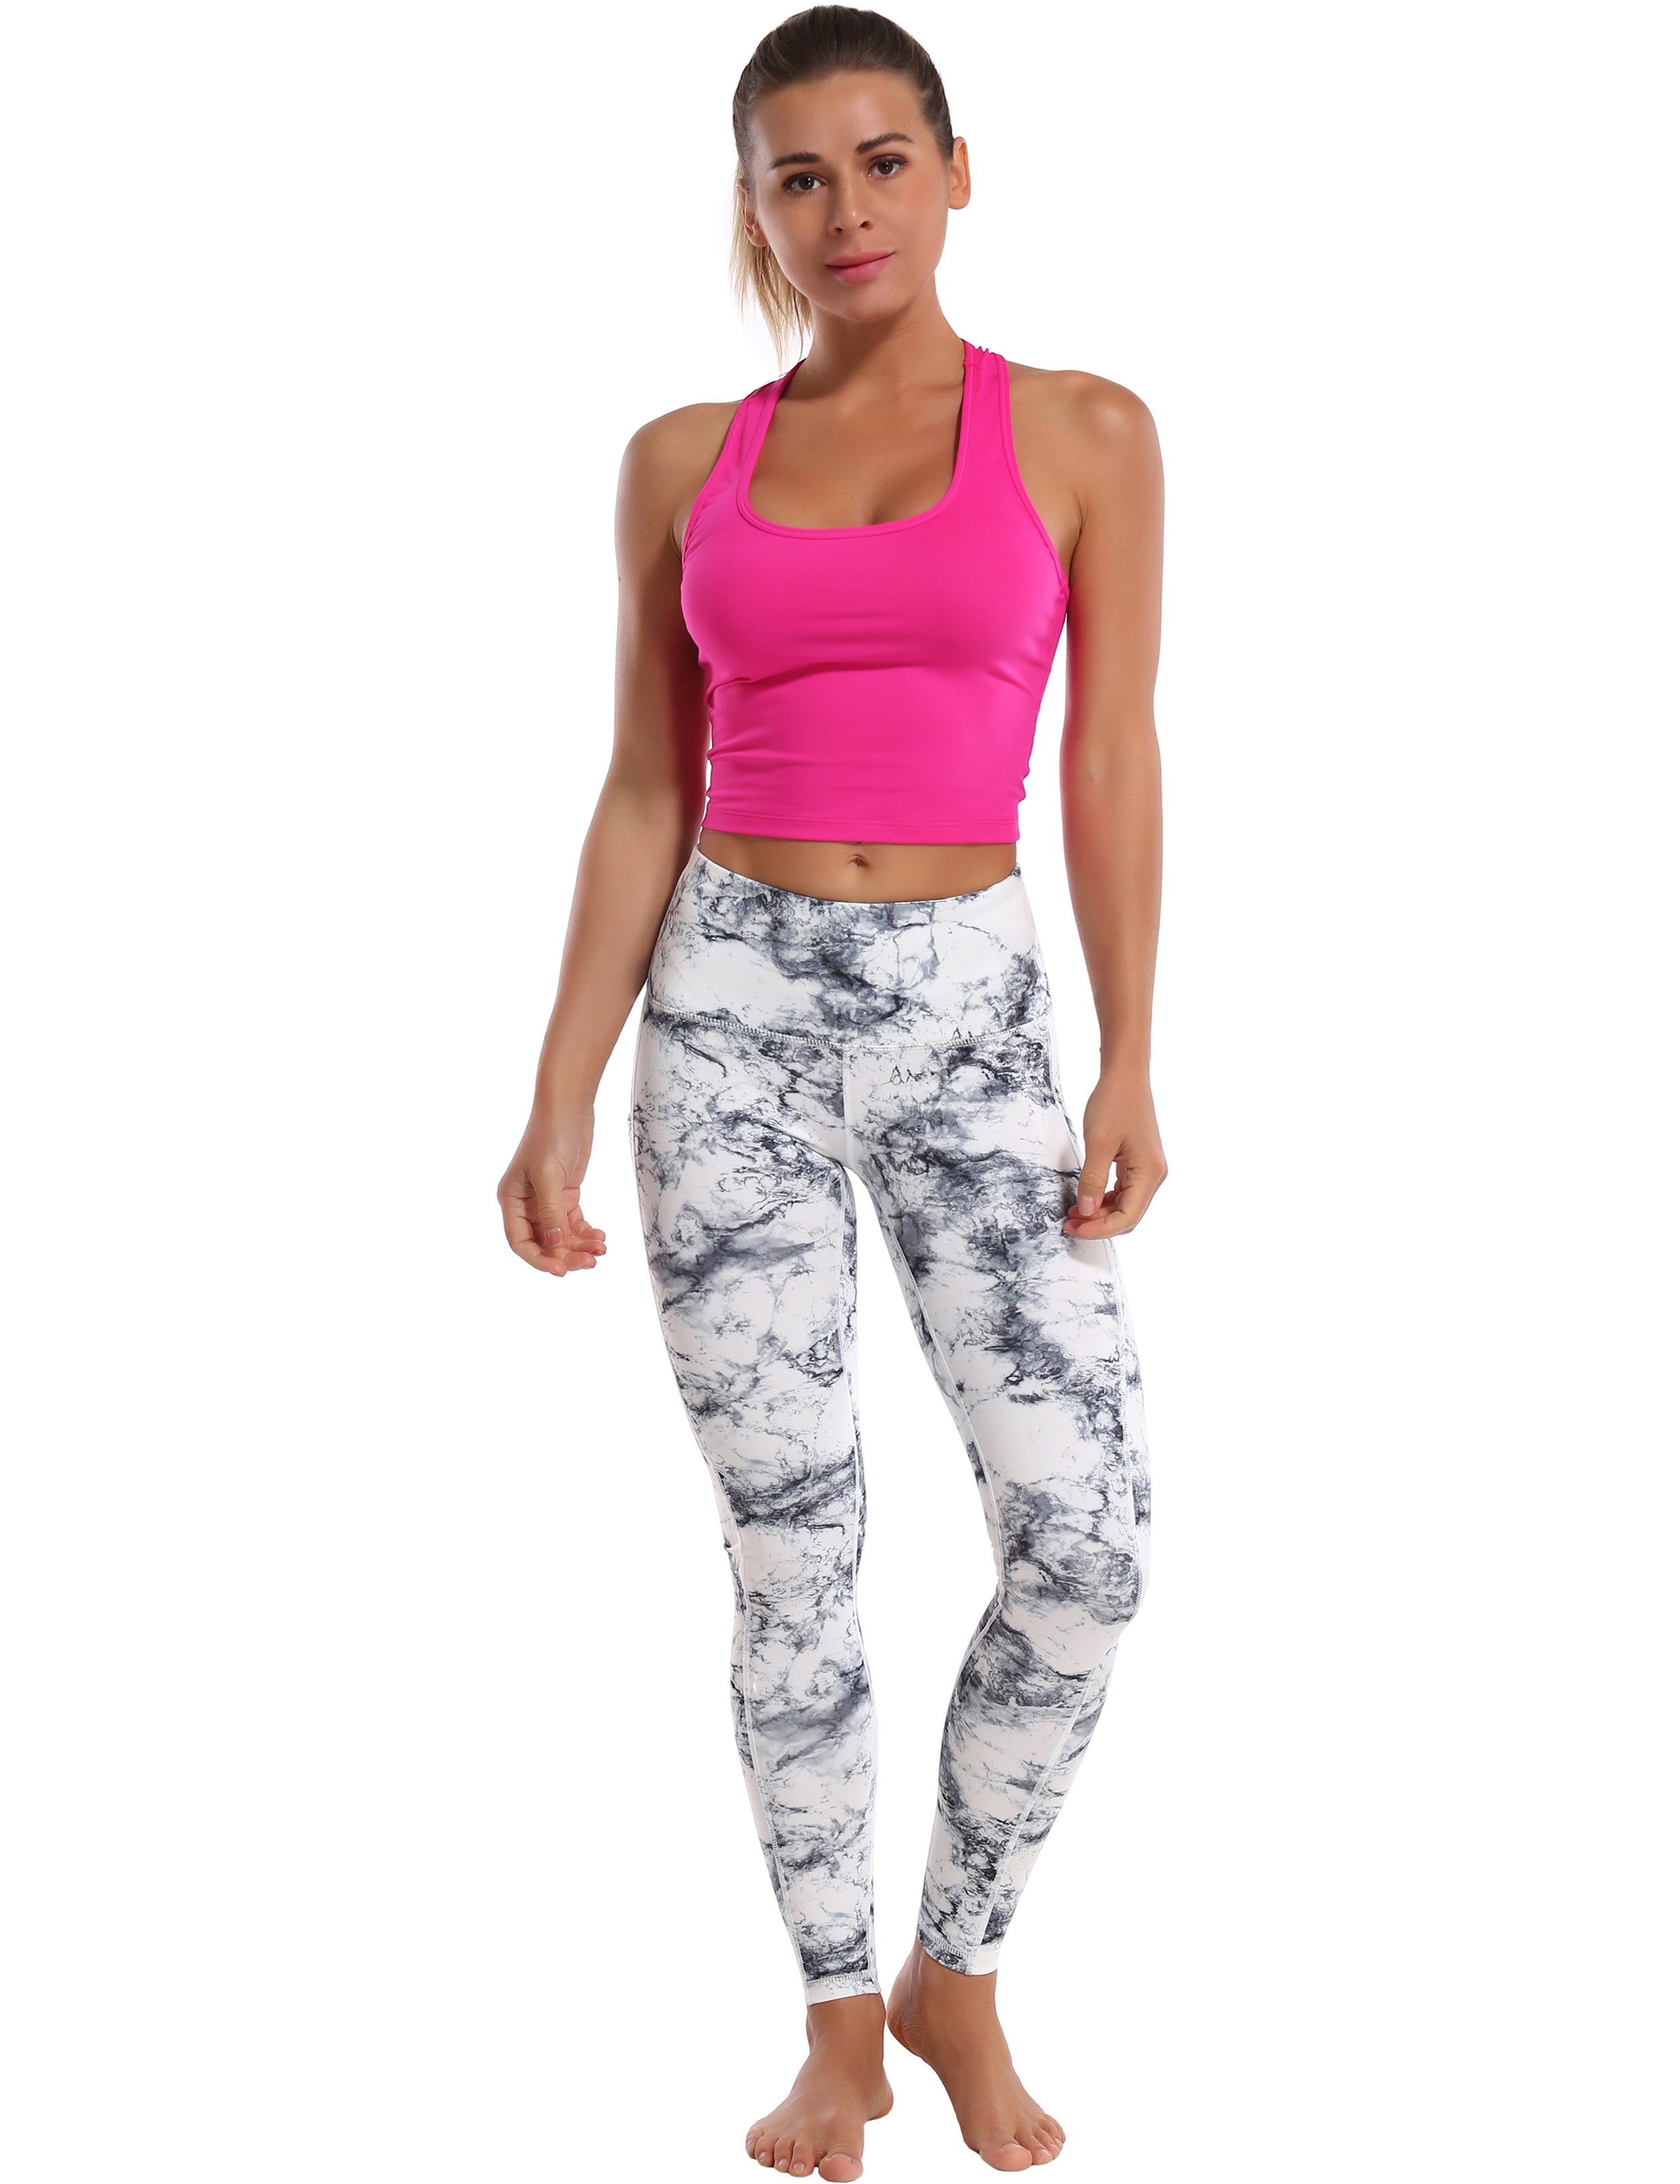 Hip Line Side Pockets Pilates Pants arabescato Sexy Hip Line Side Pockets 78%Polyester/22%Spandex Fabric doesn't attract lint easily 4-way stretch No see-through Moisture-wicking Tummy control Inner pocket